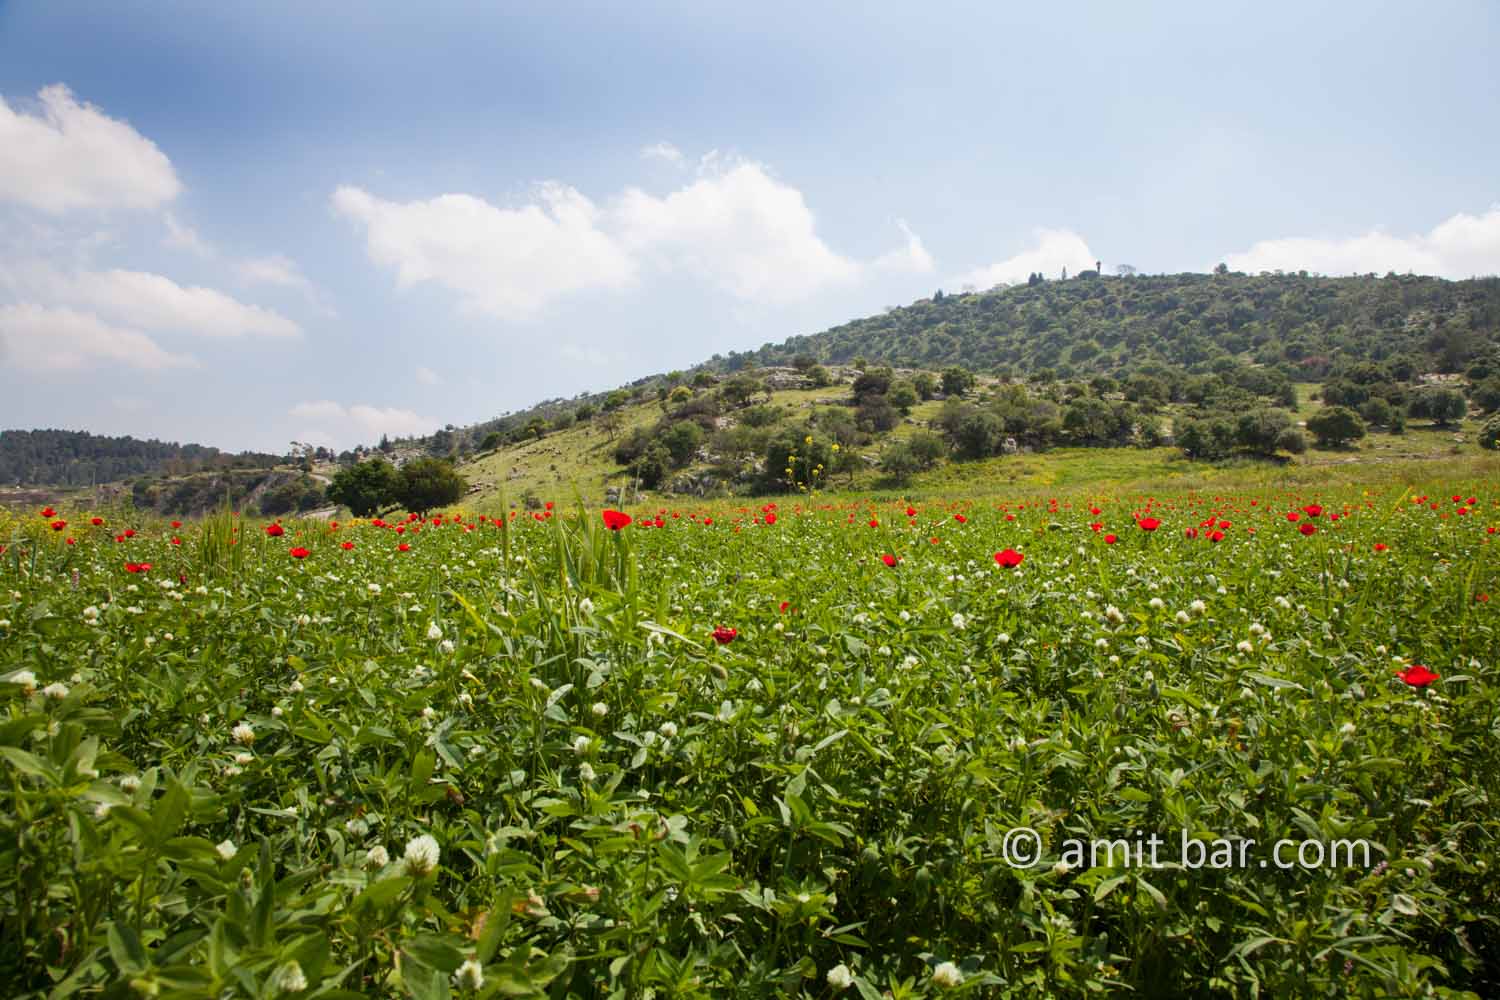 Poppies: Spring time in Israel